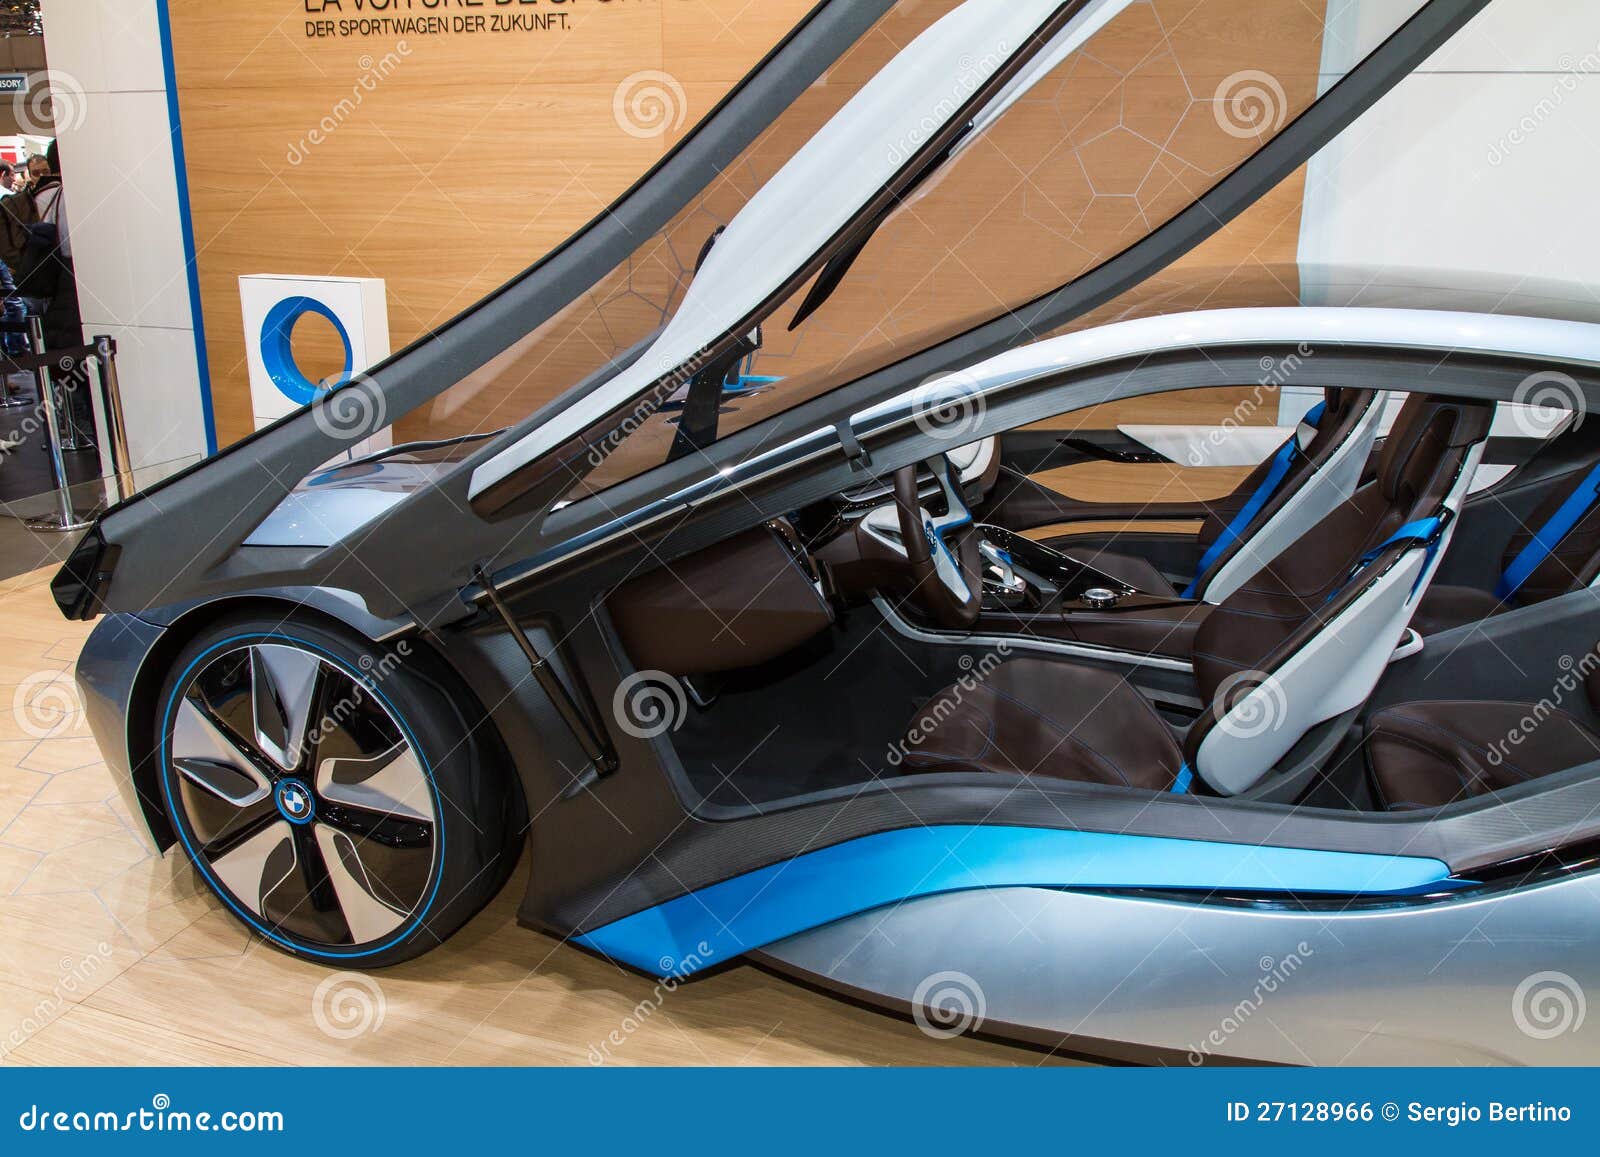 royalty free stock image bmw electric sport car image